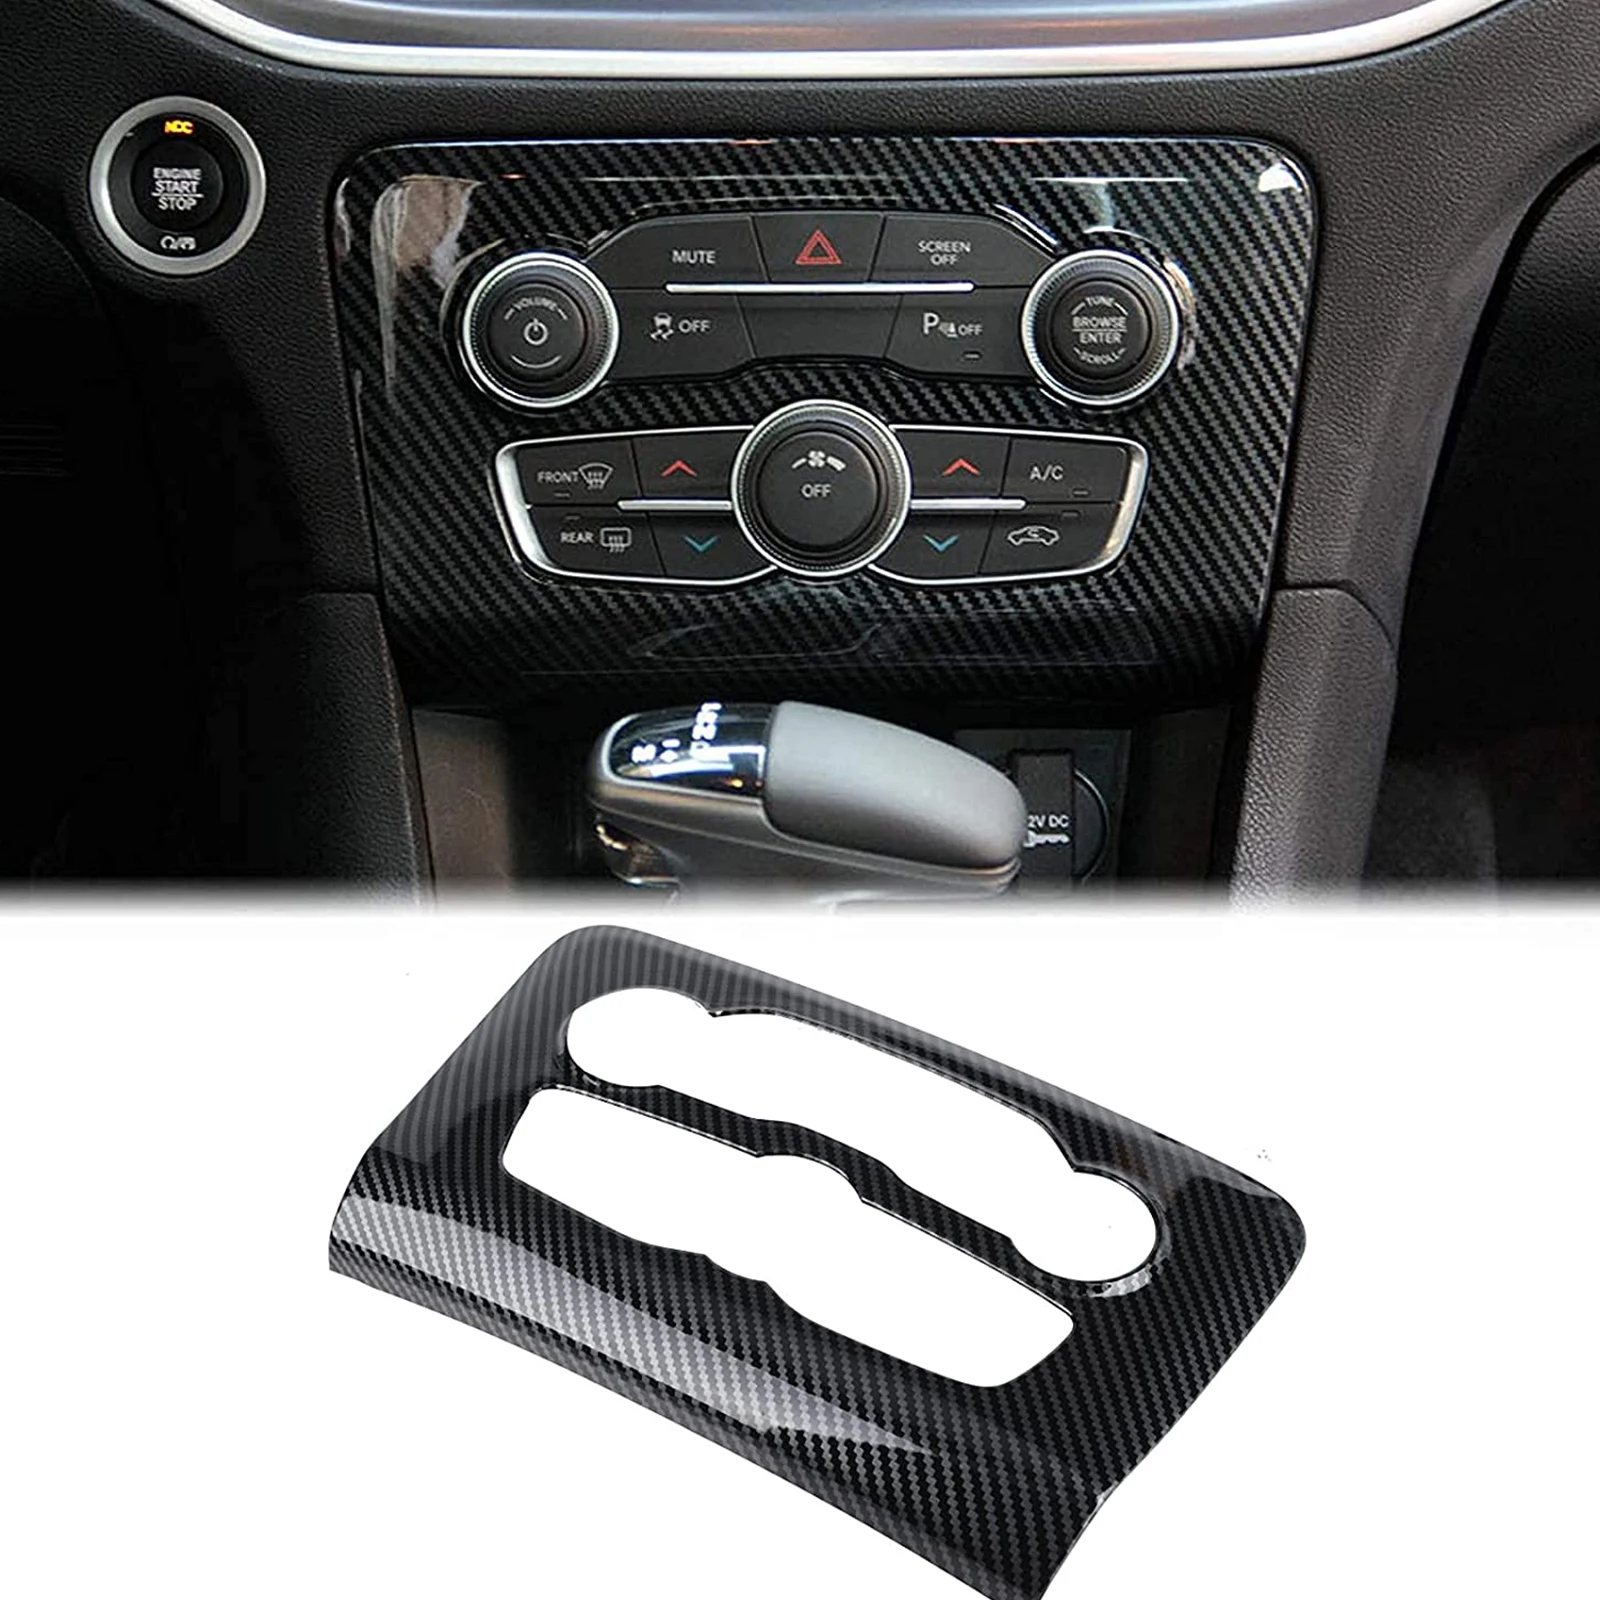 

Carbon Fiber Central Control Air Conditioning A/C Panel Cover tirm for Dodge Charger 2015+